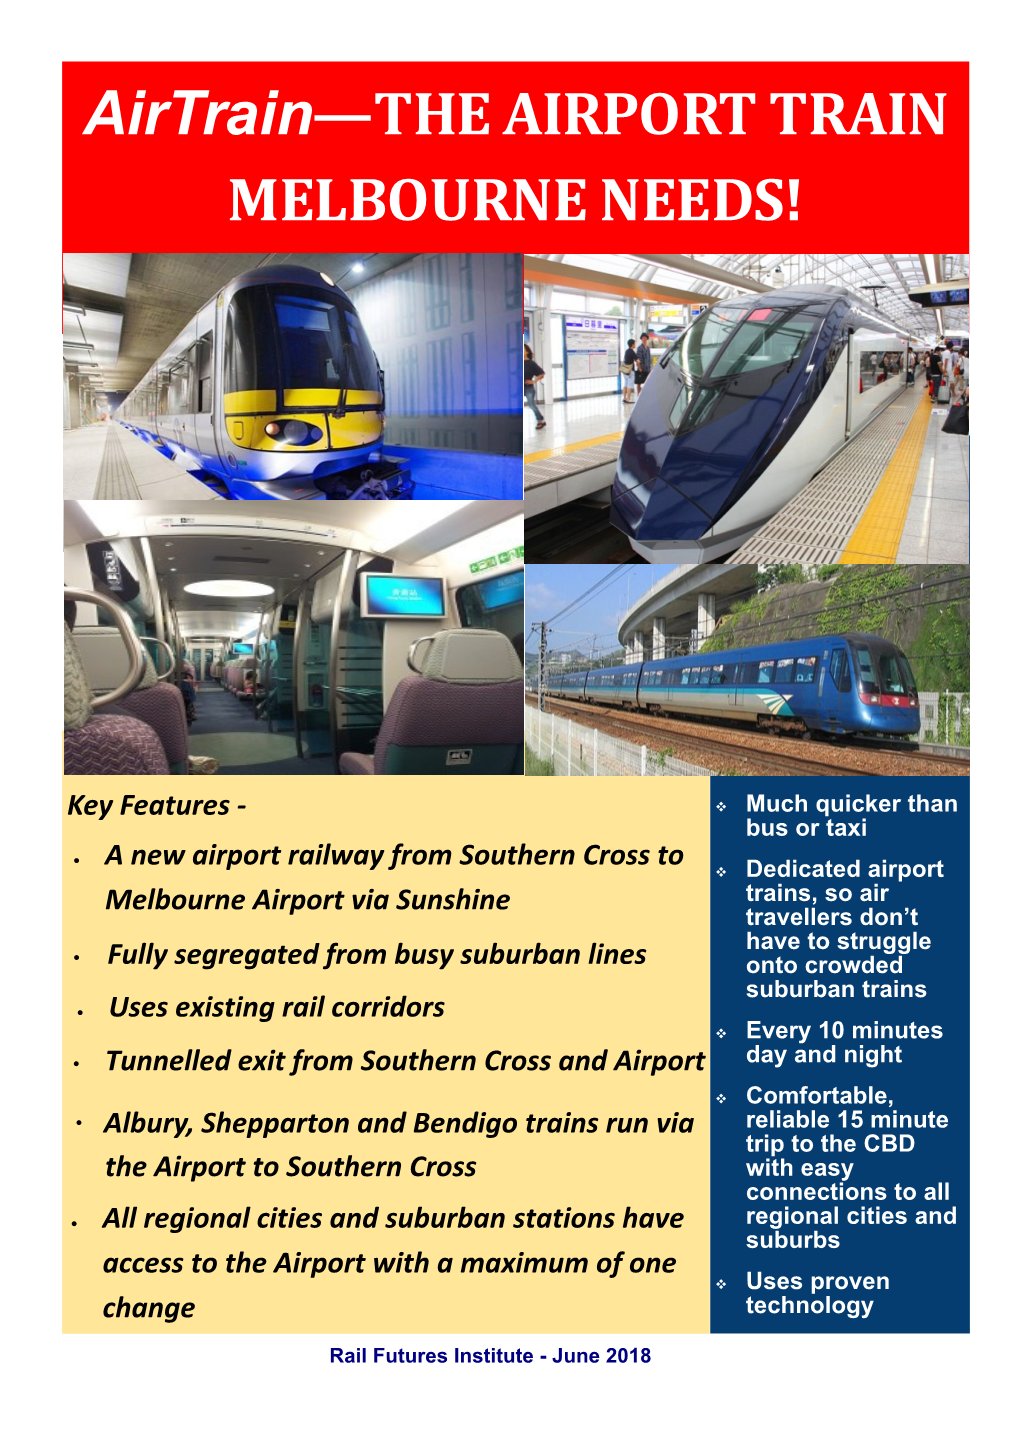 Airtrain—THE AIRPORT TRAIN MELBOURNE NEEDS!